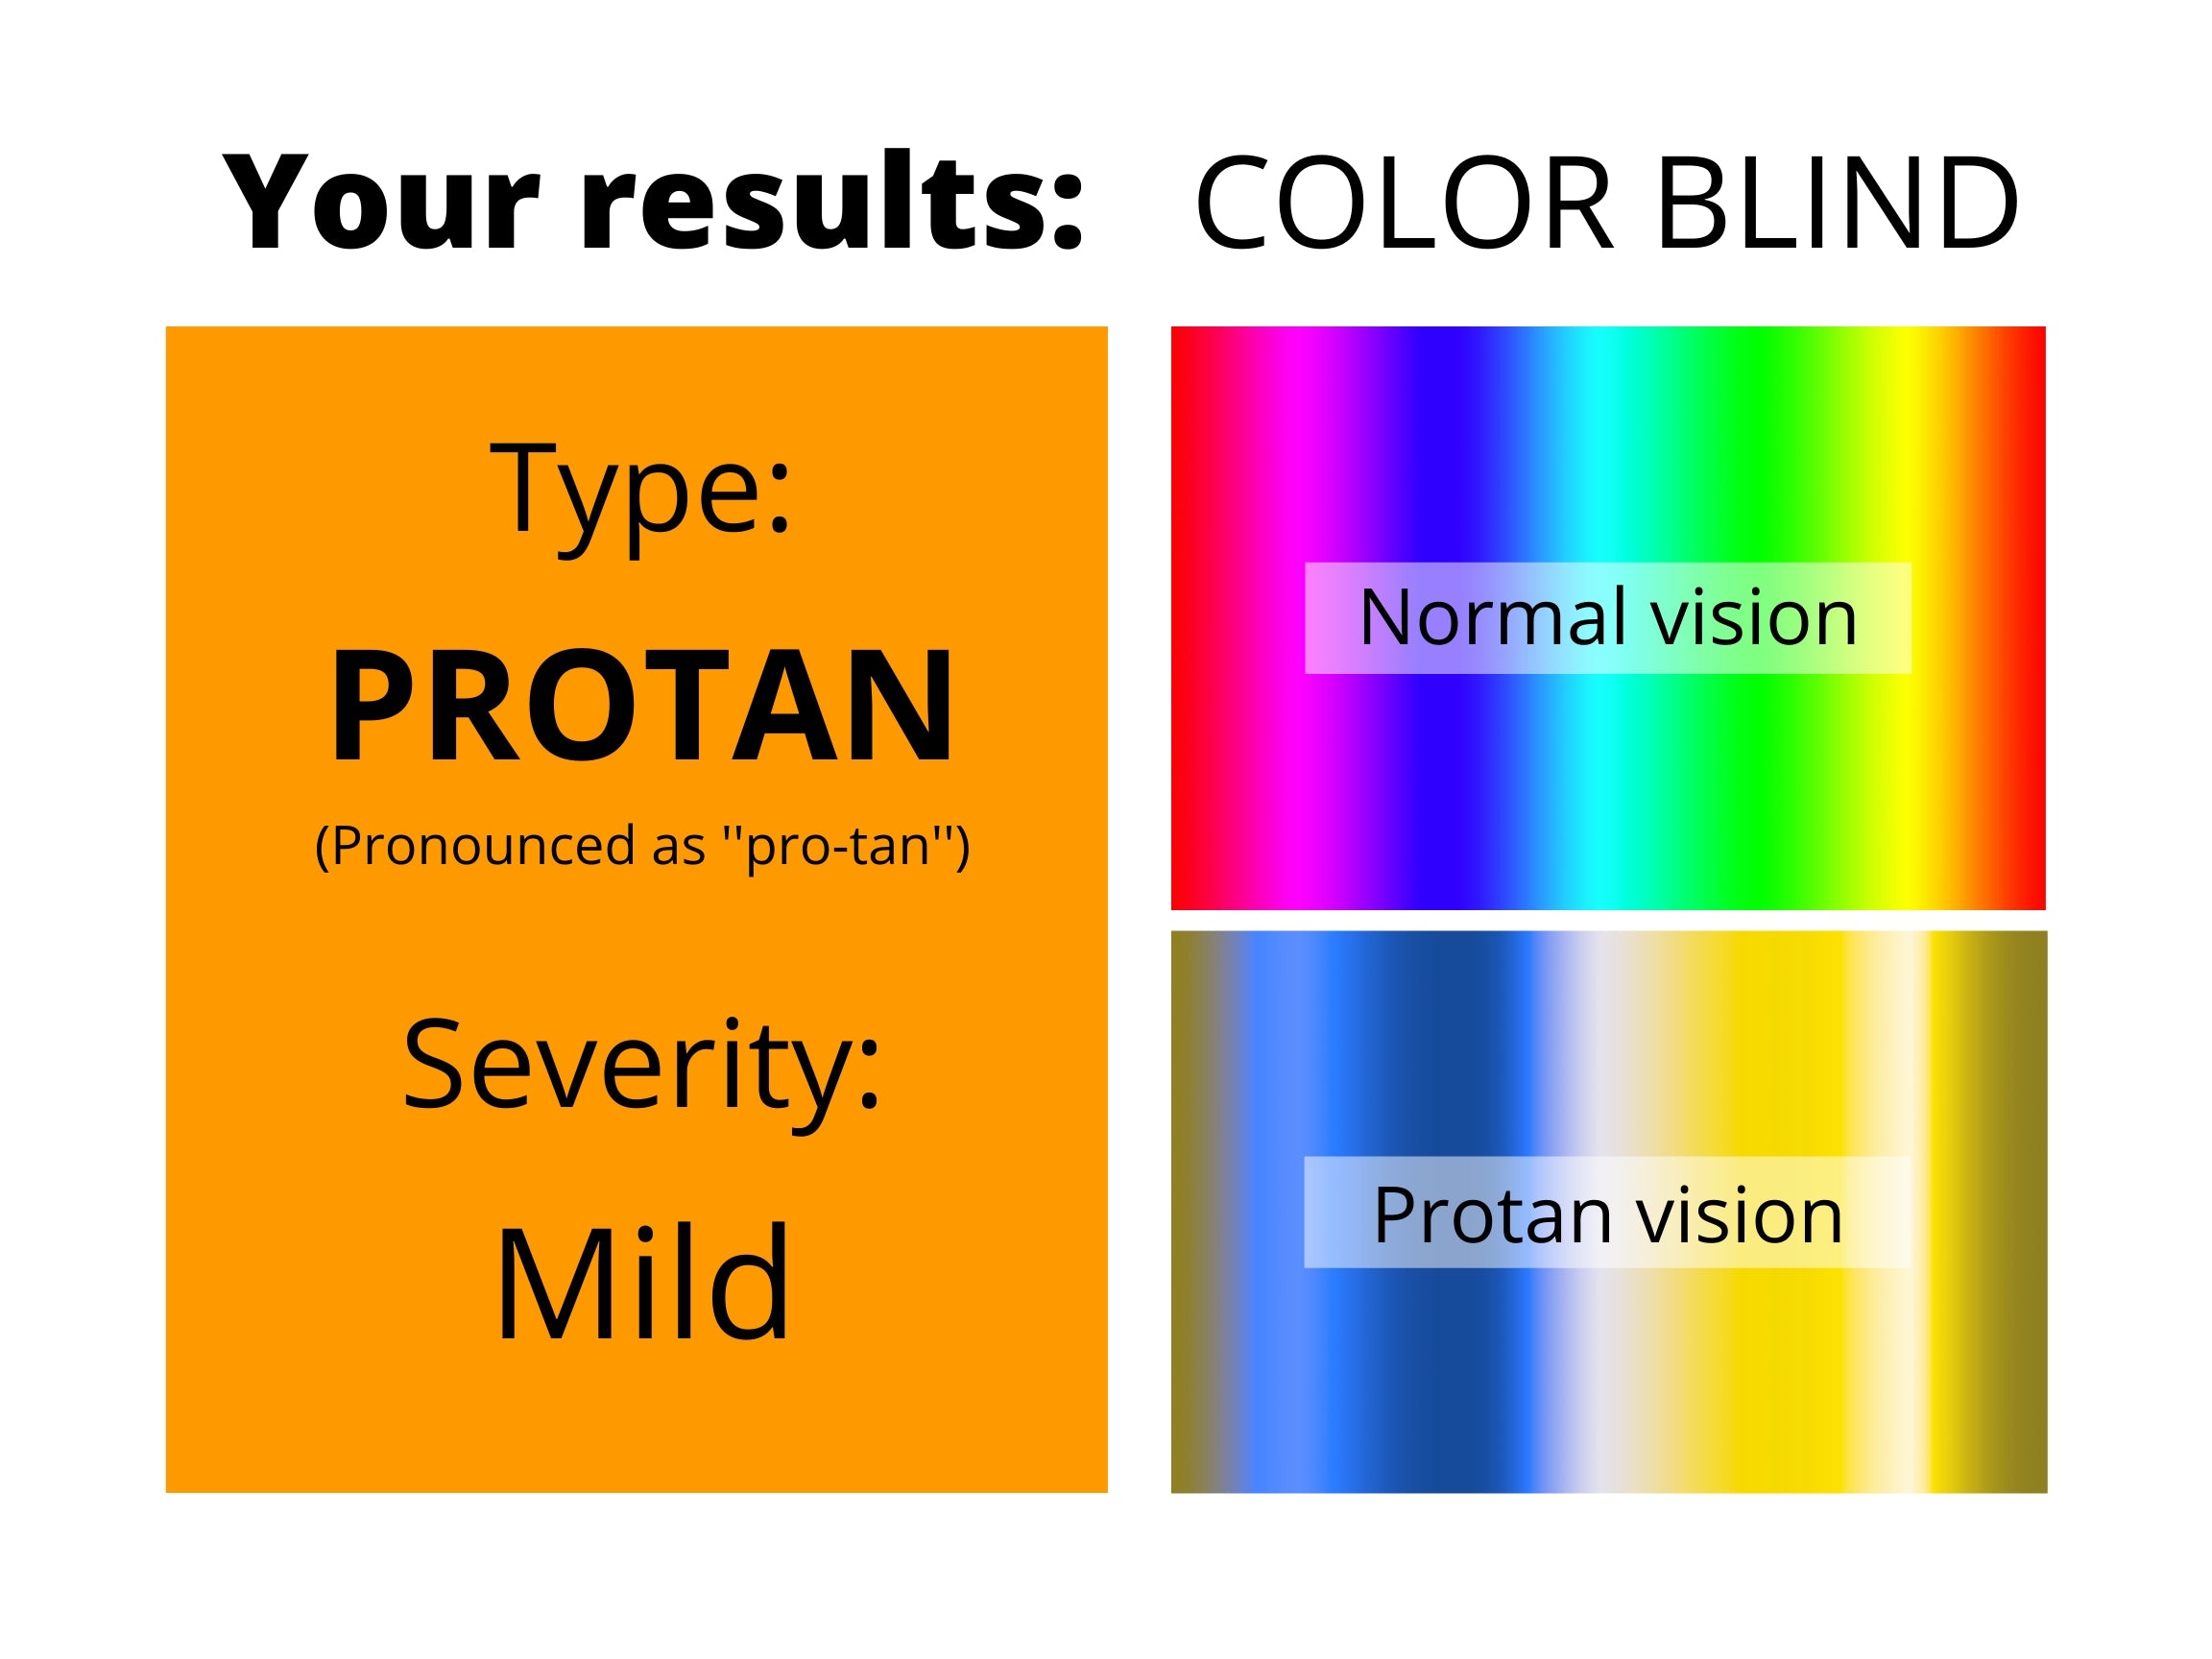 What is very mild colour blindness?